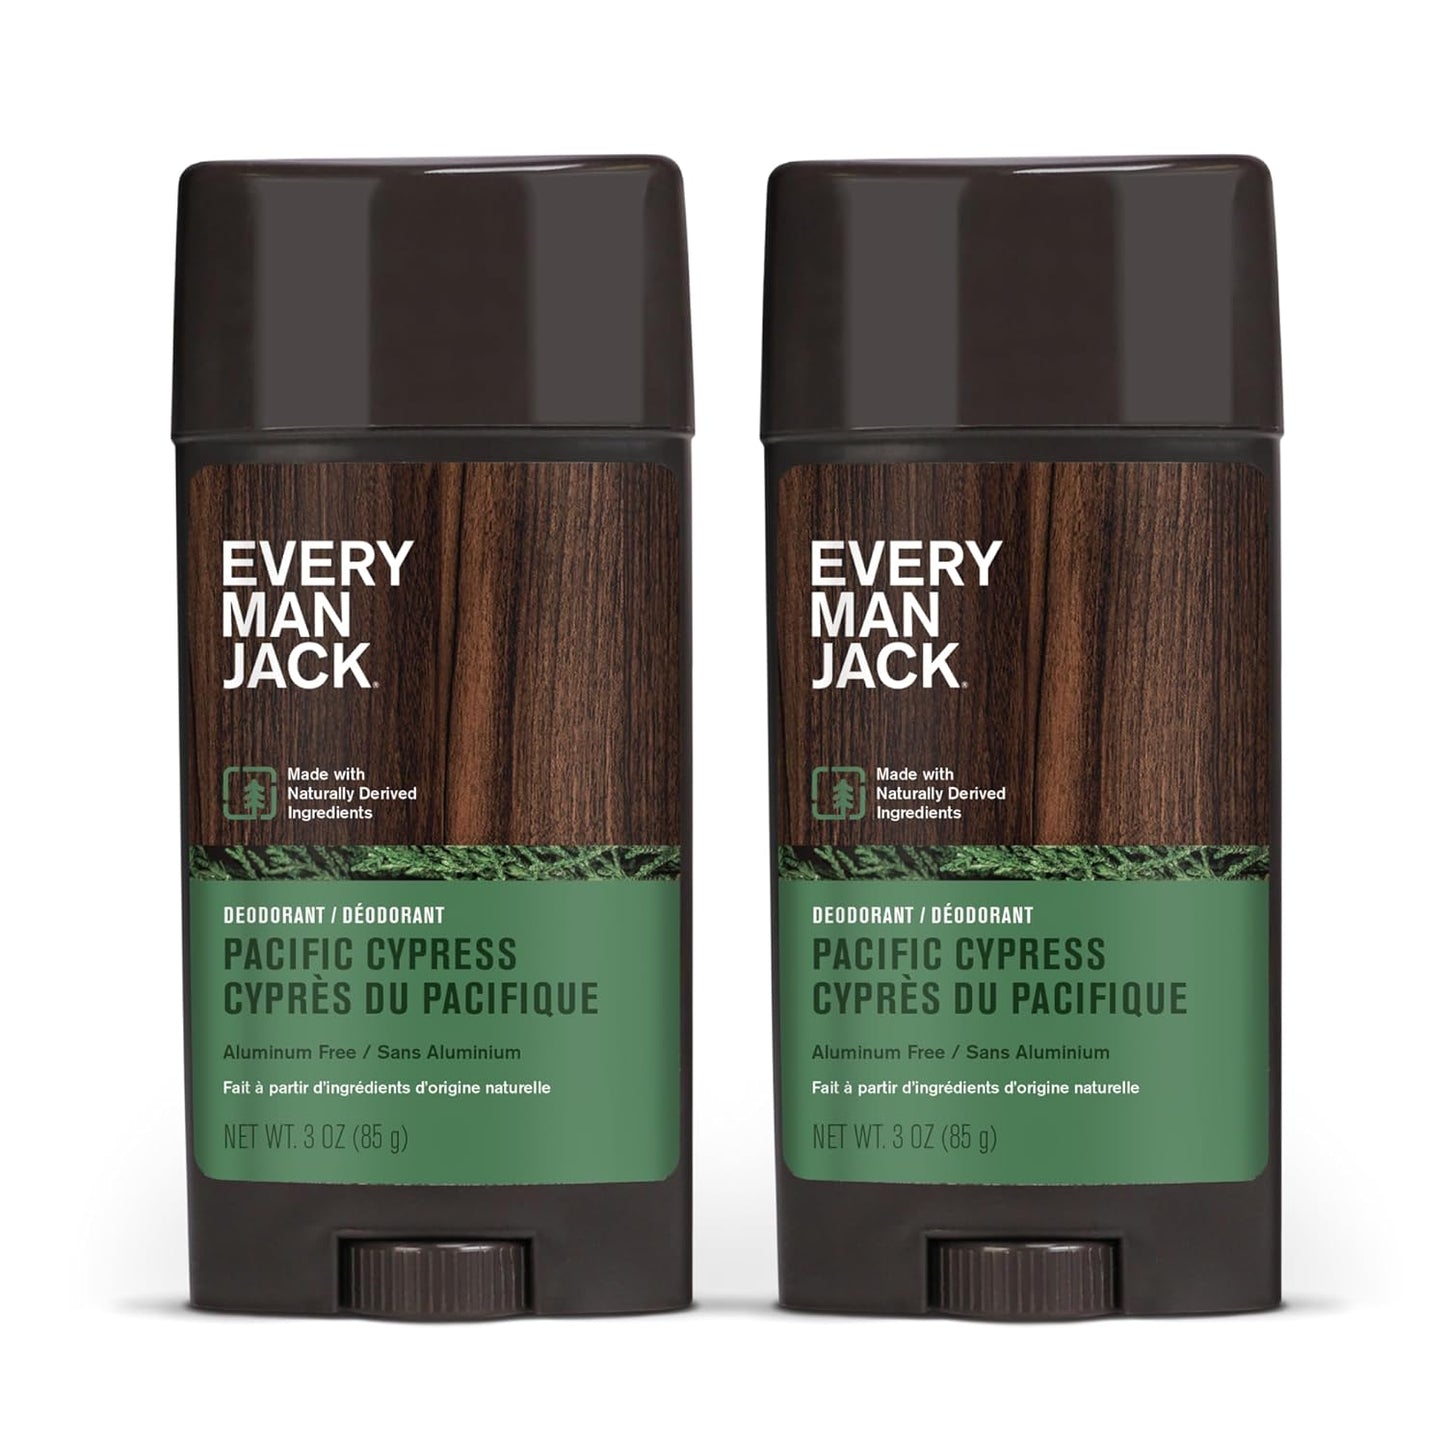 Every Man Jack Pacific Cypress Men’s Deodorant - Stay Fresh with Aluminum Free Deodorant For all Skin Types - Odor Crushing, Long Lasting, with Naturally Derived Ingredients - 3oz